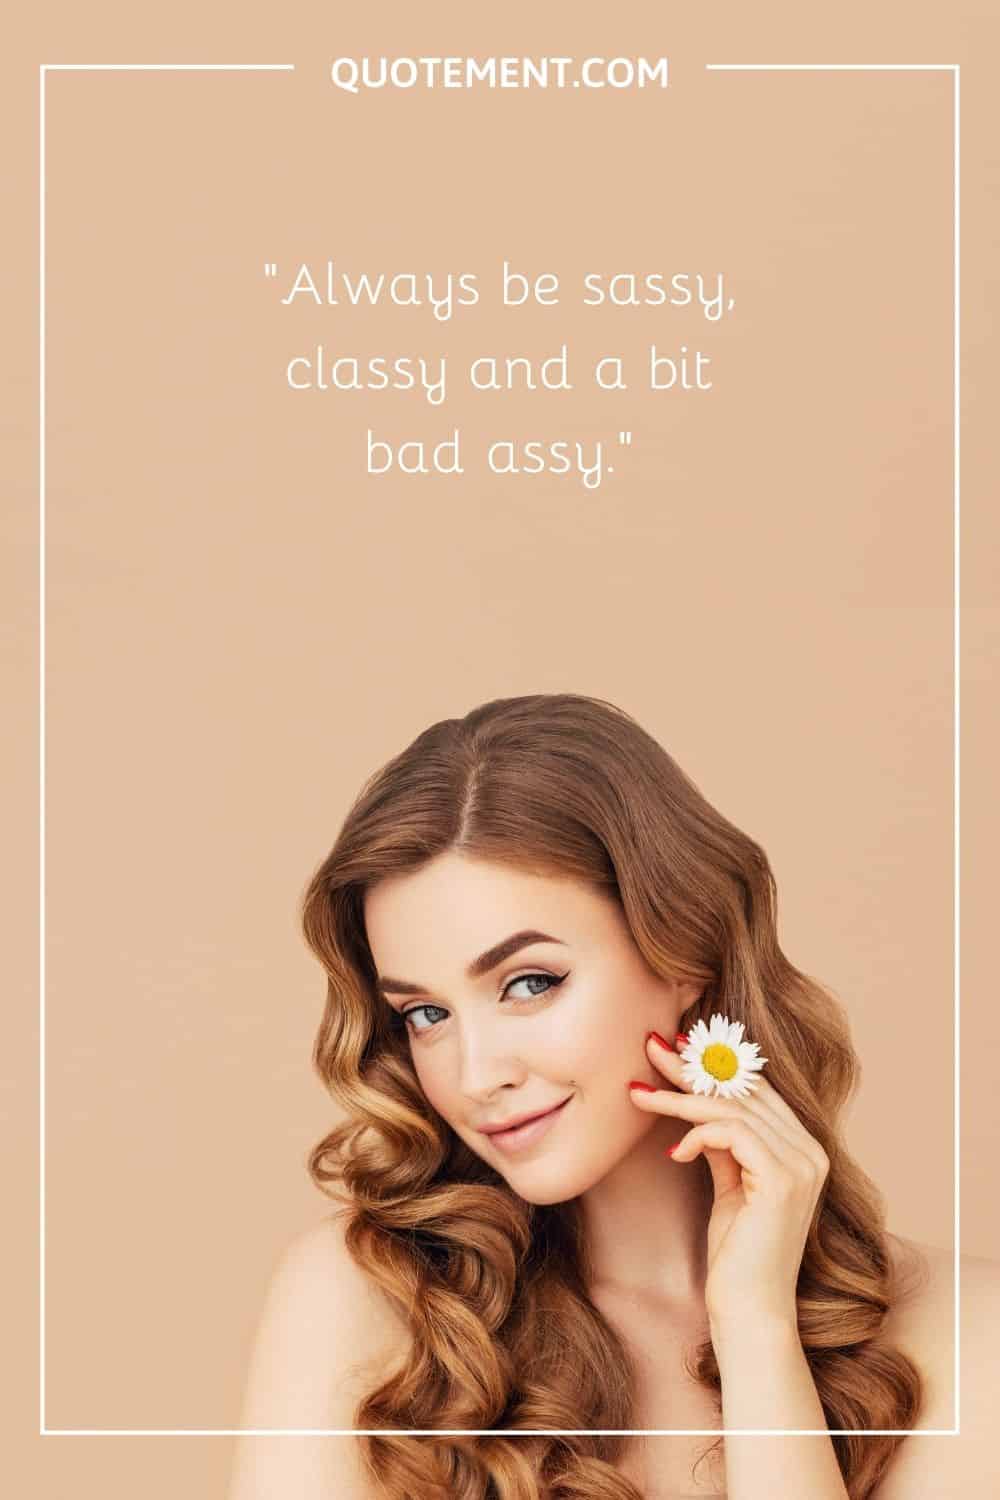 Always be sassy, classy and a bit bad assy